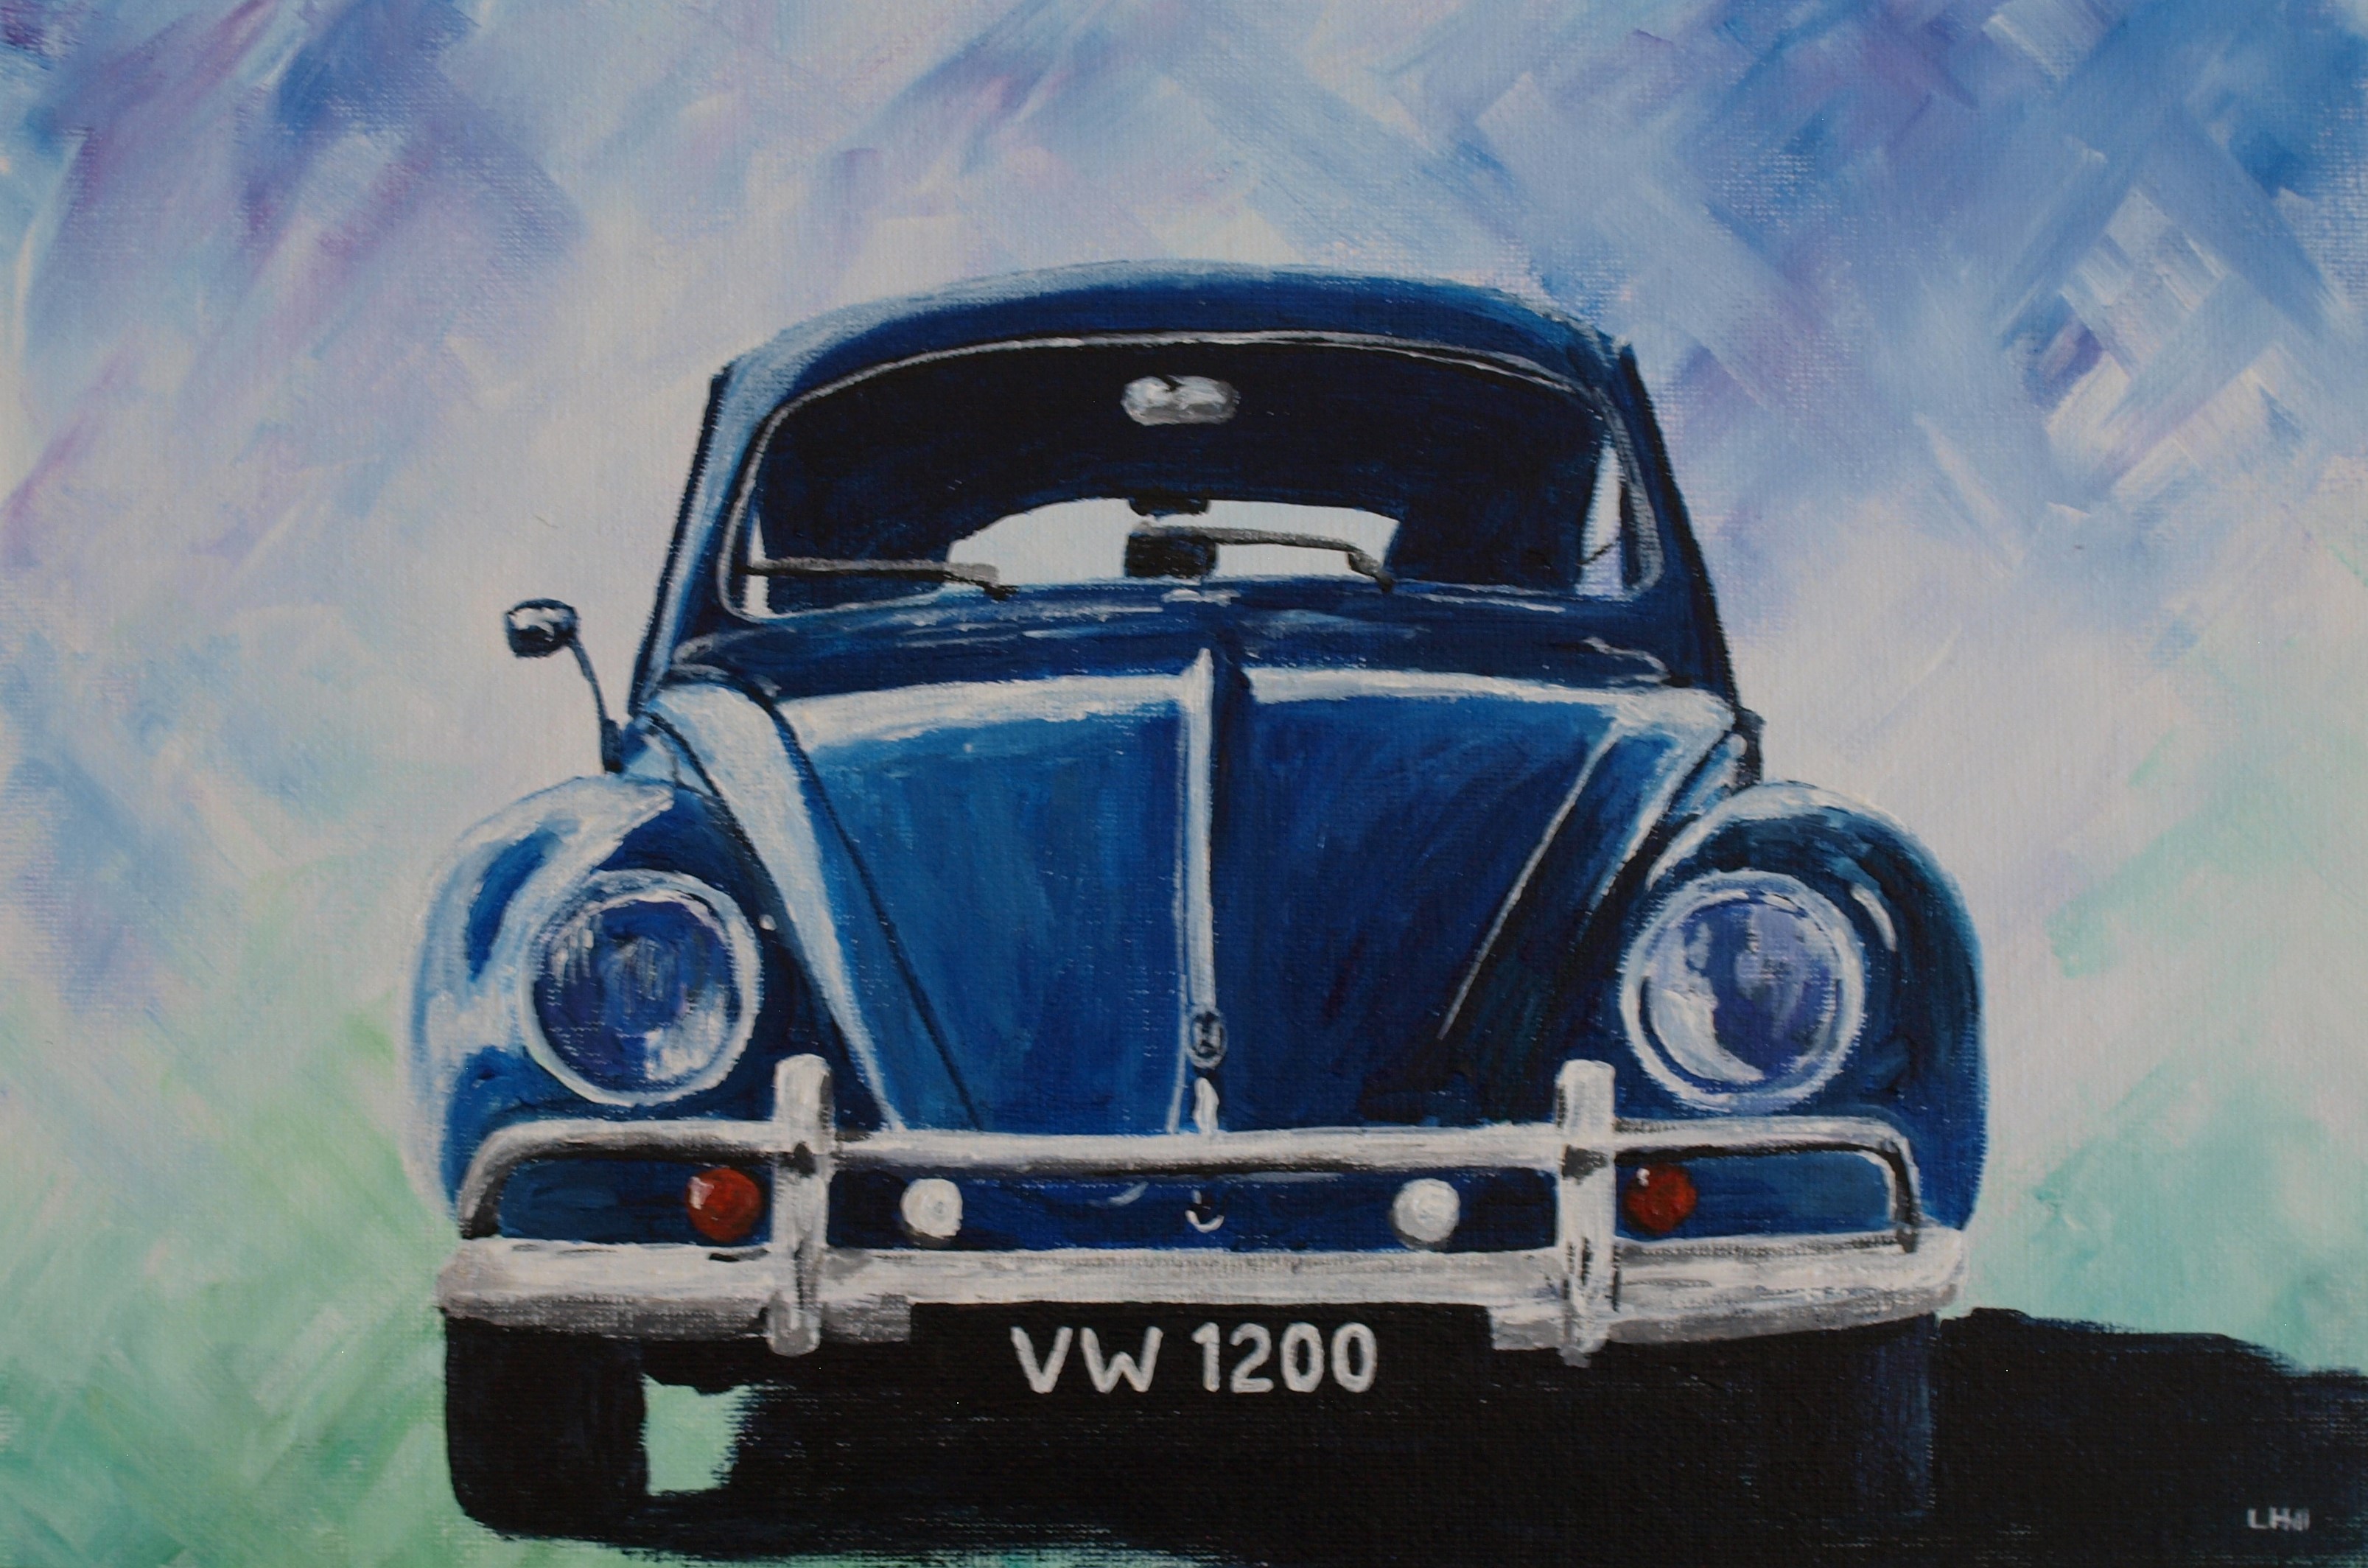 VW Beetle acrylic painting by Louisa Hill